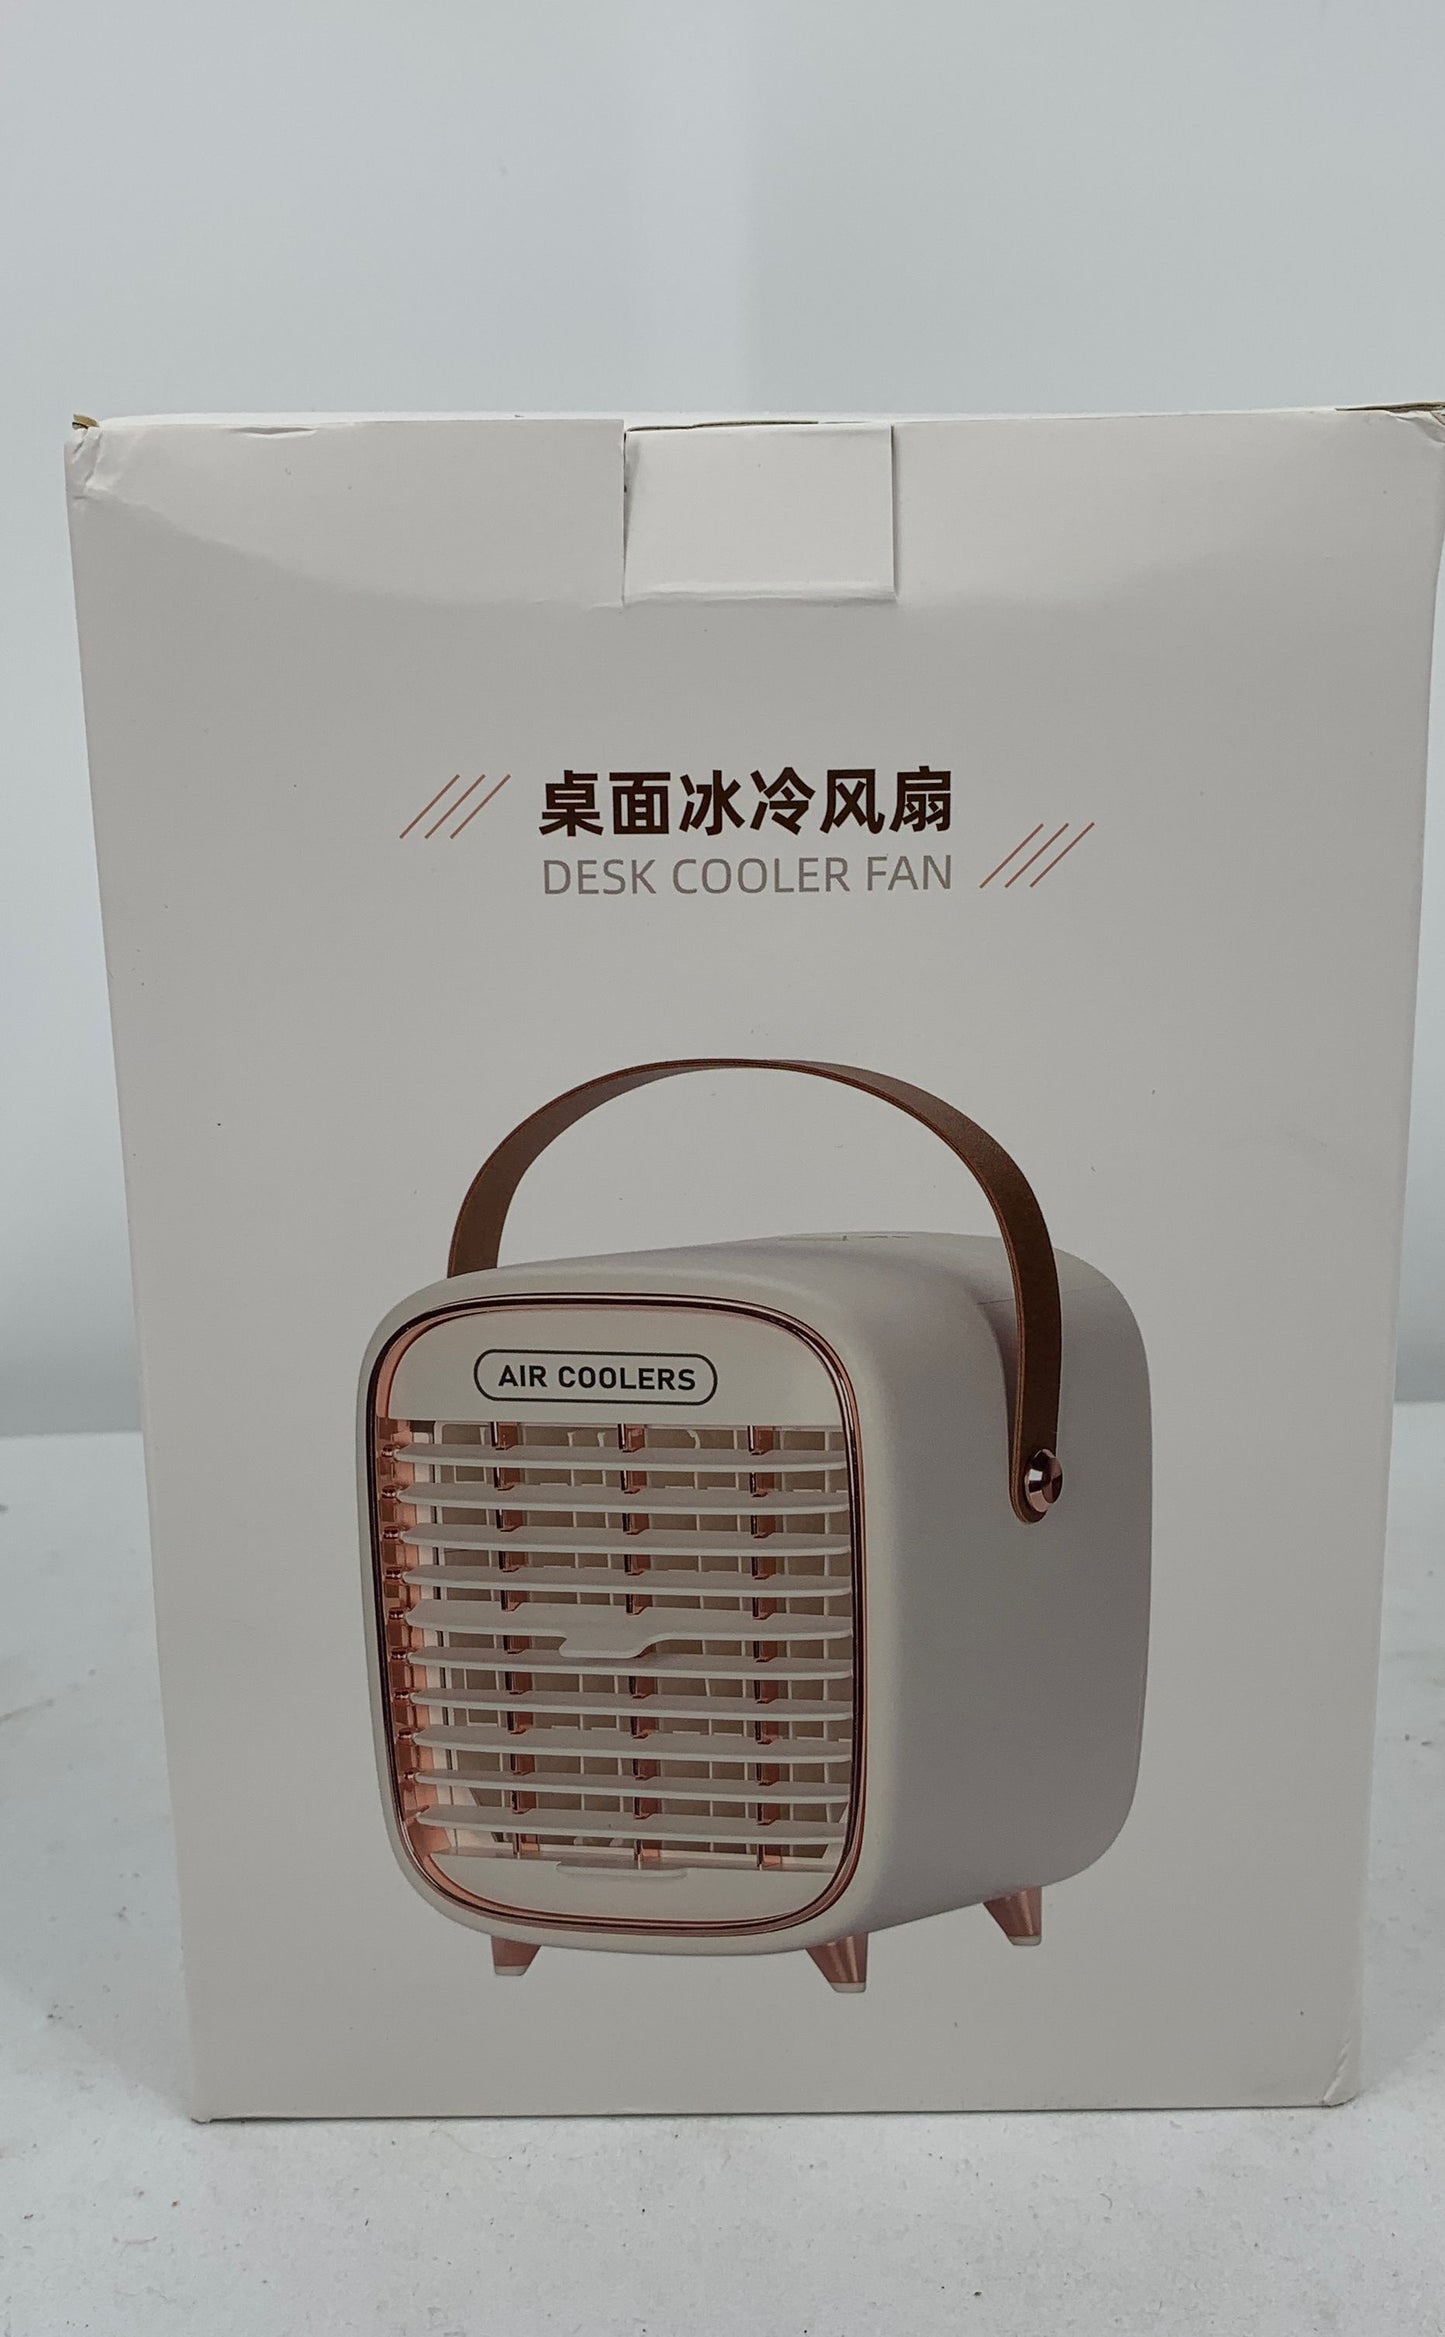 Air Coolers White Desk Cooler Fan Model Y3 With Handle NEW